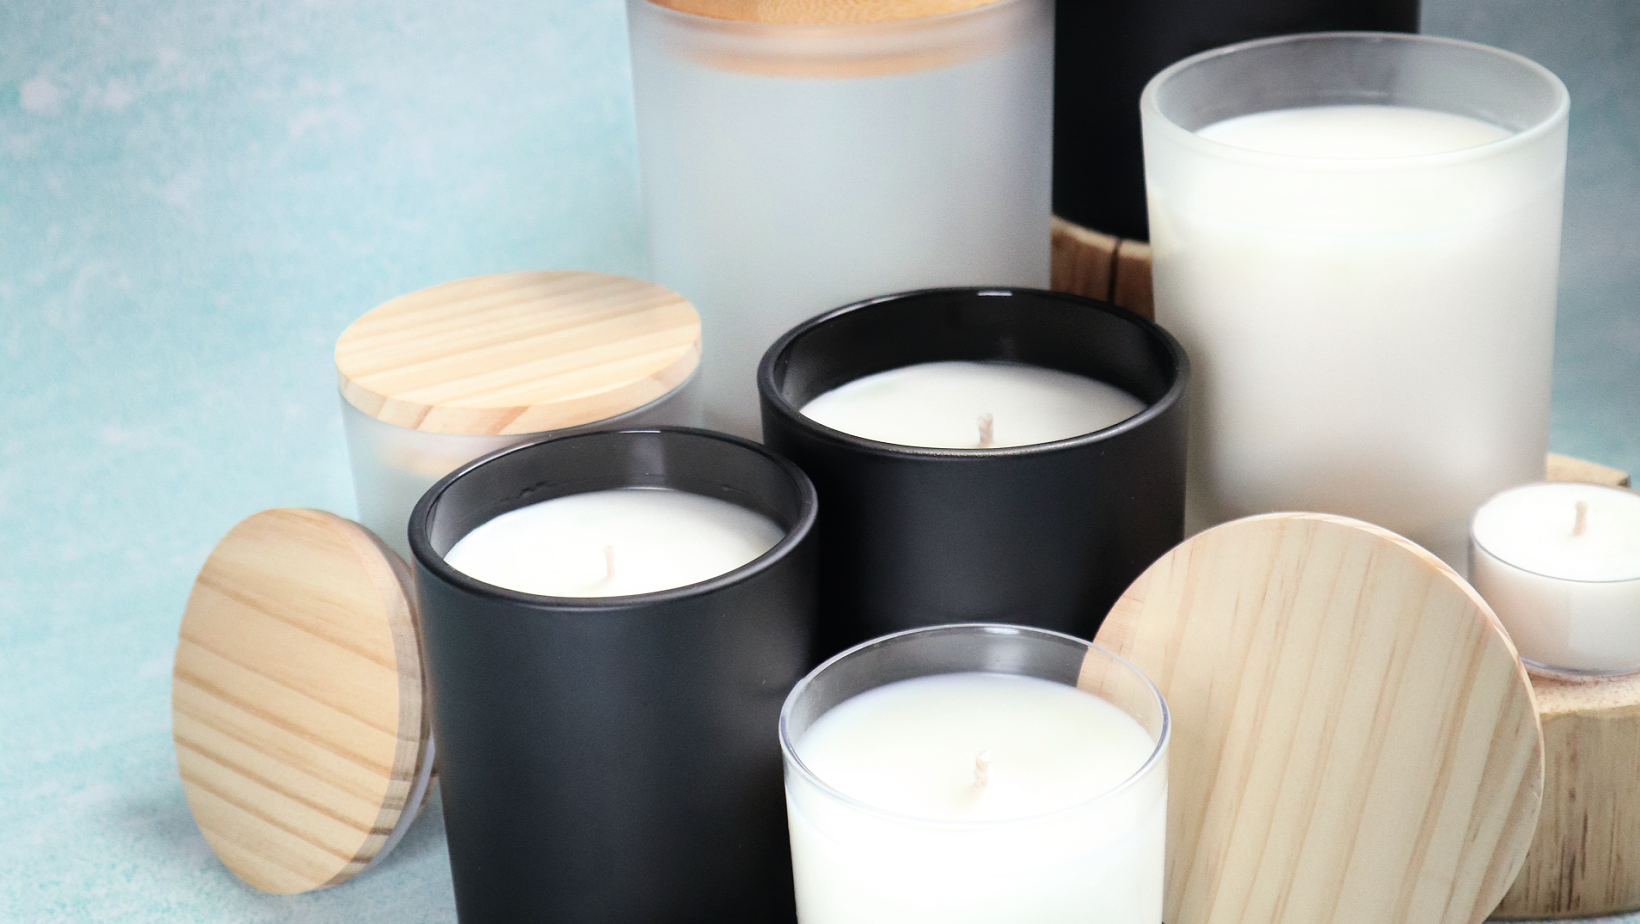 How Much Fragrance Oil Can I Add to My Candles? – NorthWood Distributing